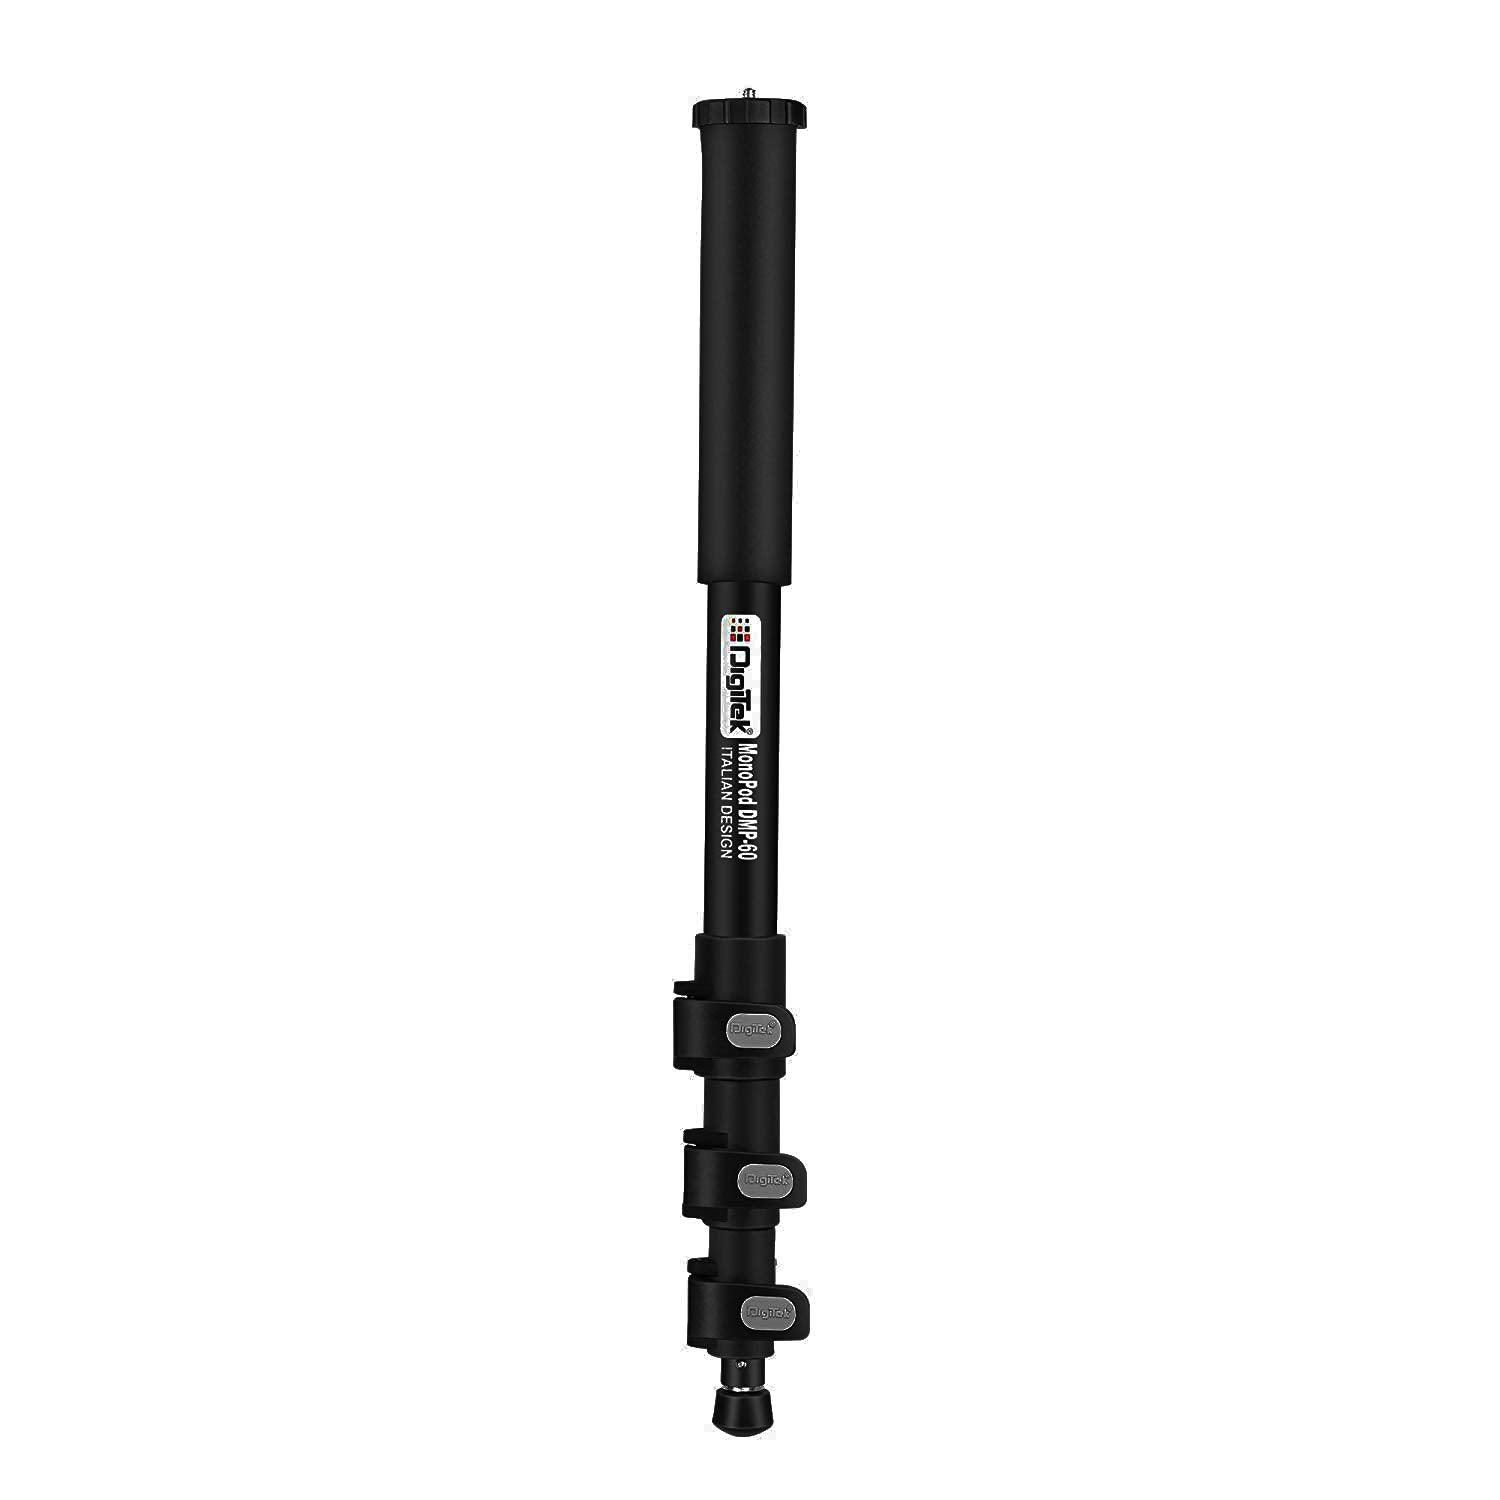 Digitek (DMP 60N) Professional Monopod with 4 Extendable Sections & Dual Mount Thread Adapter (1/4inch and 3/8inch), Load Upto: 5 kgs, Max. Operating Height: 157 cm - Digitek